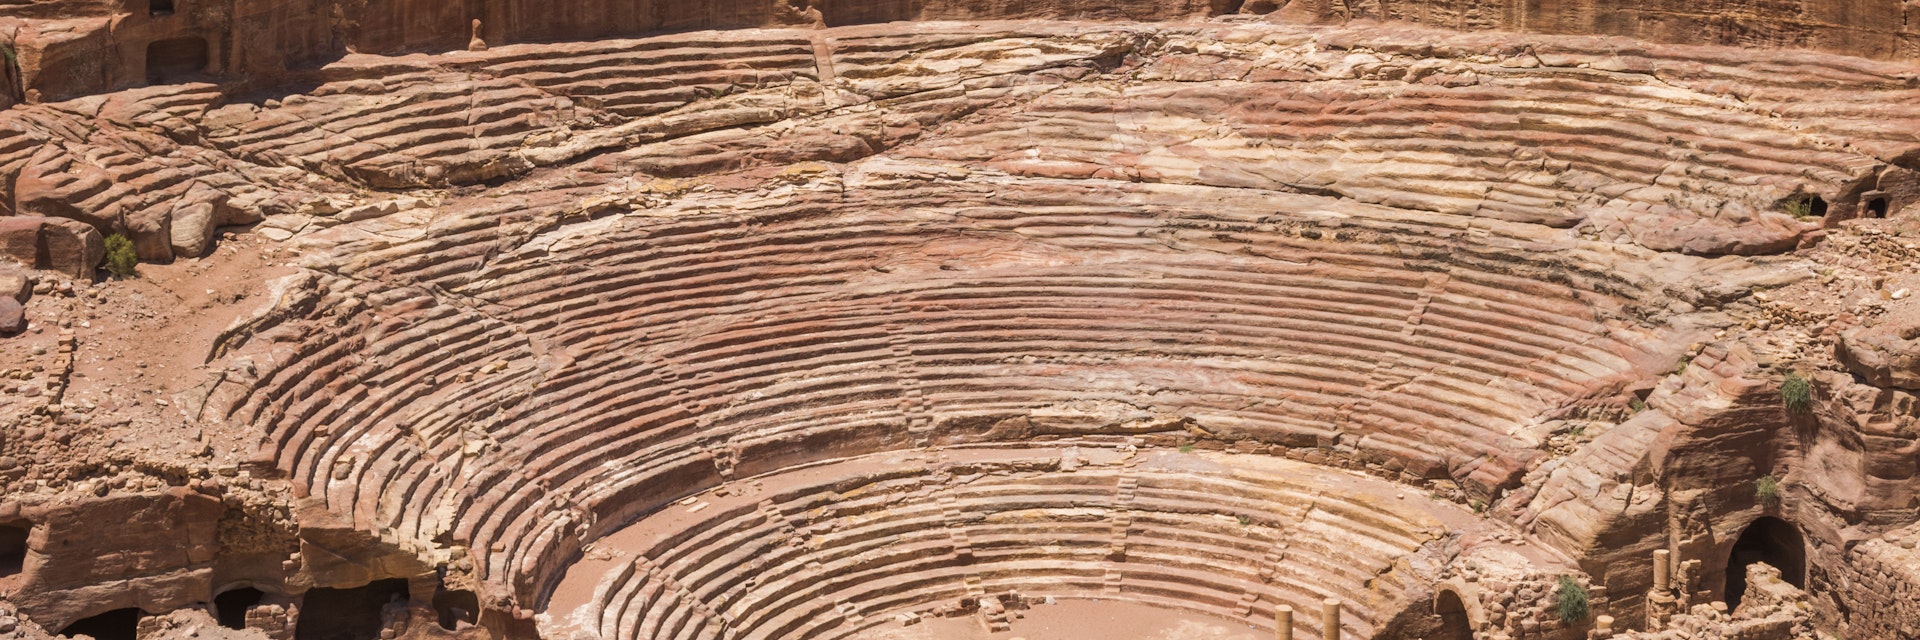 Theatre | The Ancient City, Jordan | Attractions - Lonely Planet